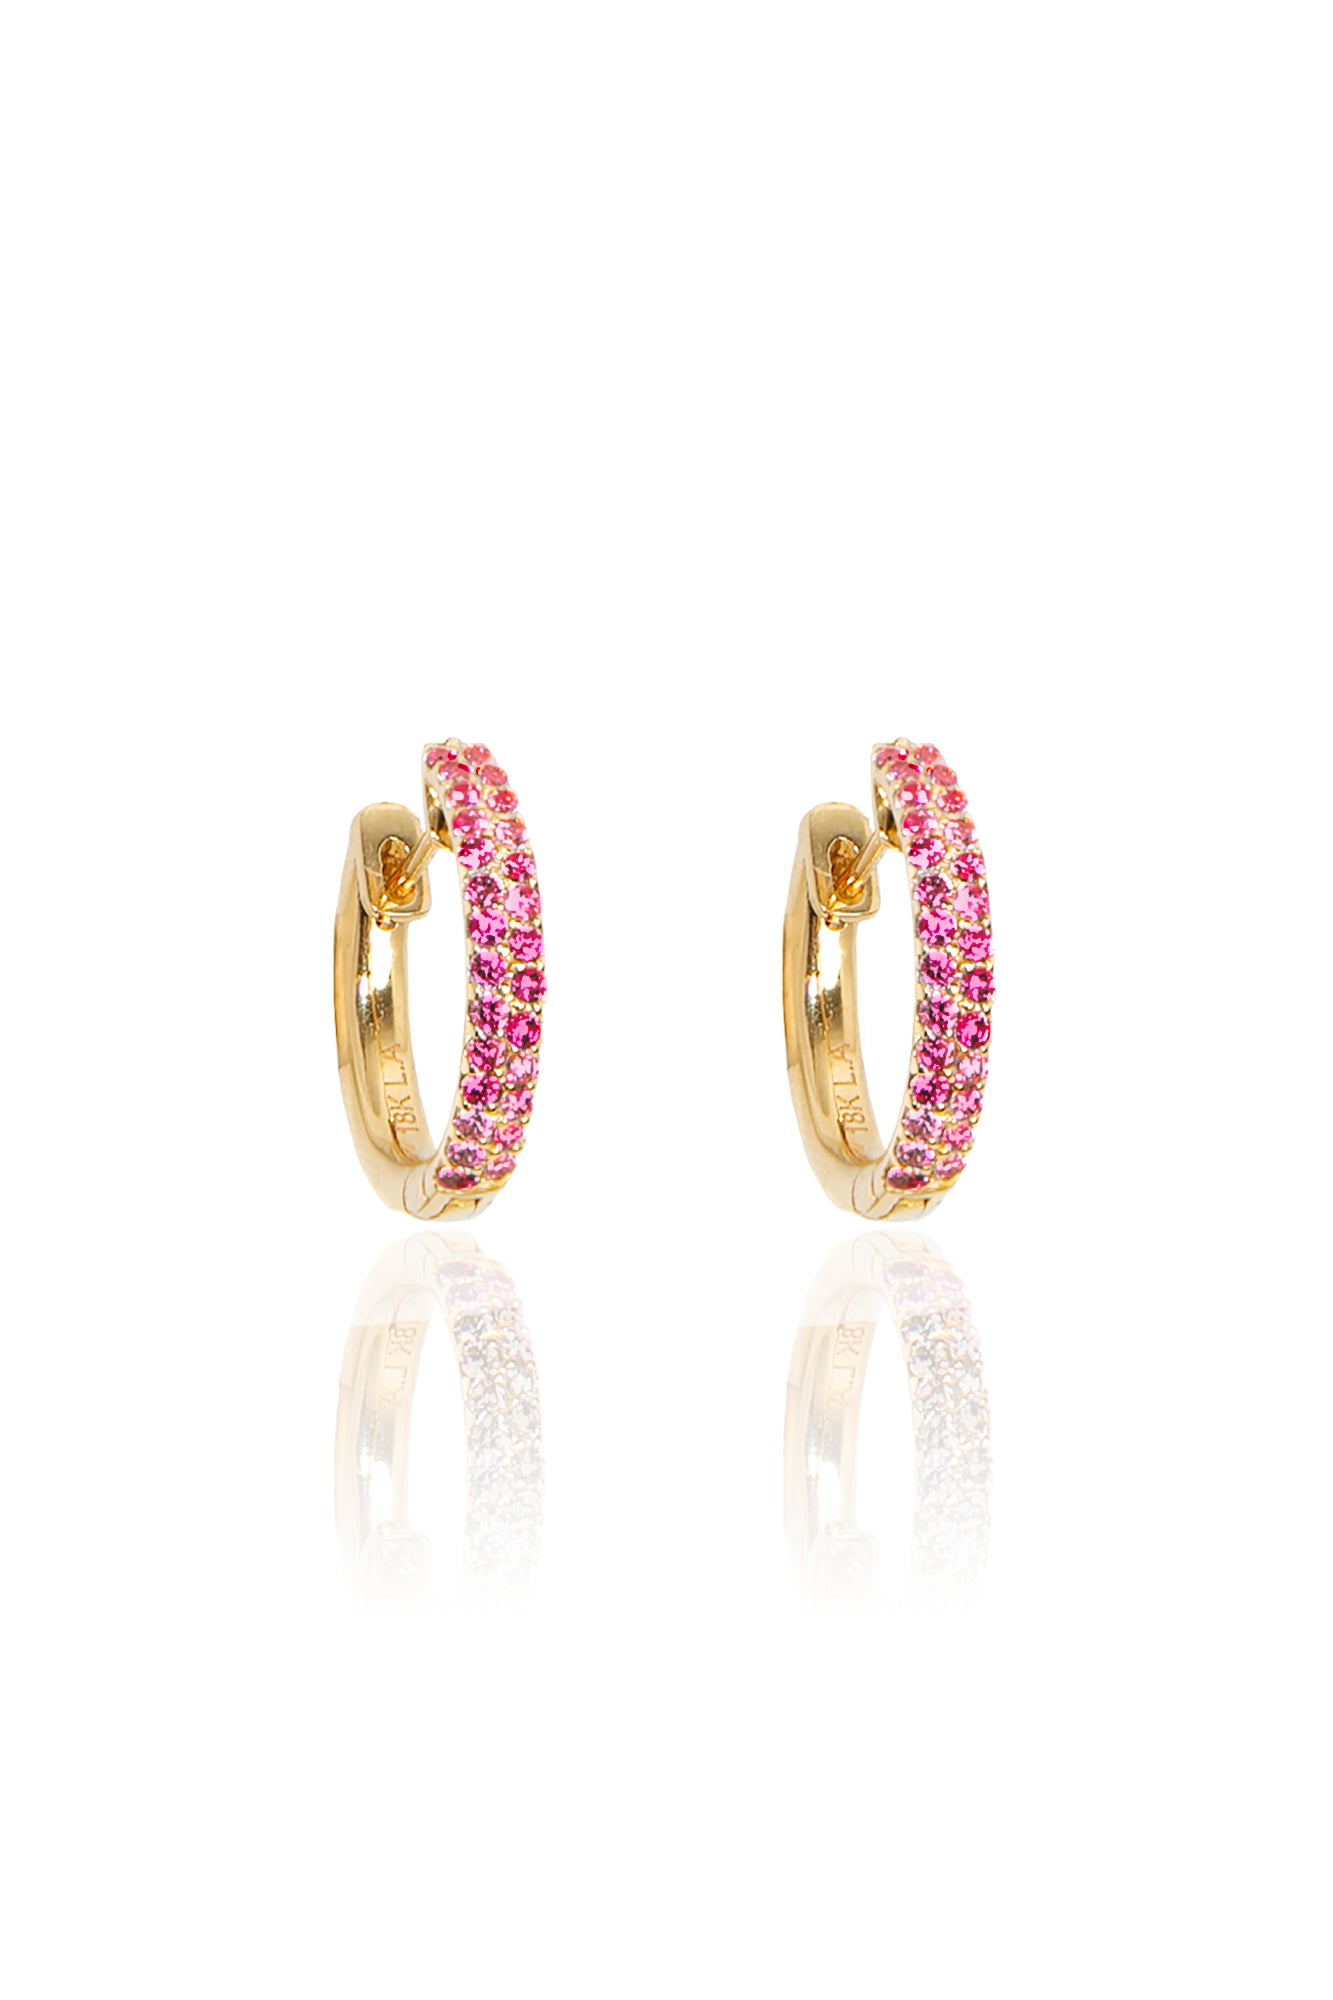 L.A. STEIN Pink Sapphire Pavé Huggies in Yellow Gold